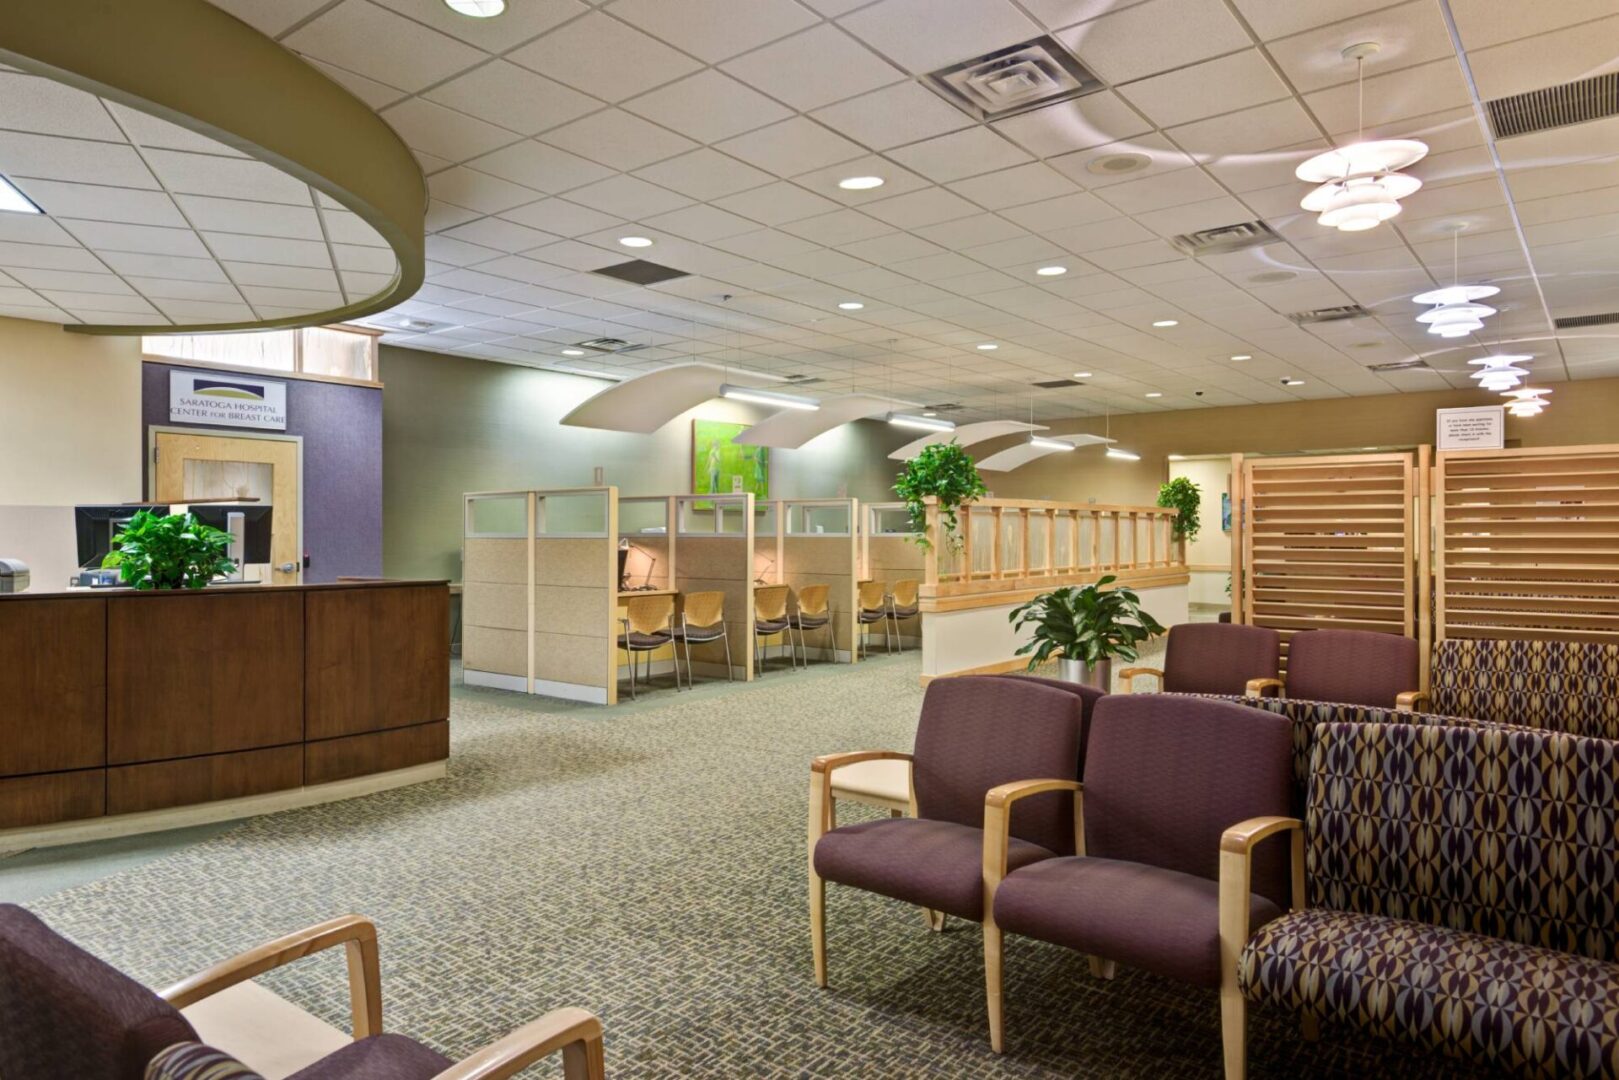 A hospital waiting room with purple chairs and tables.